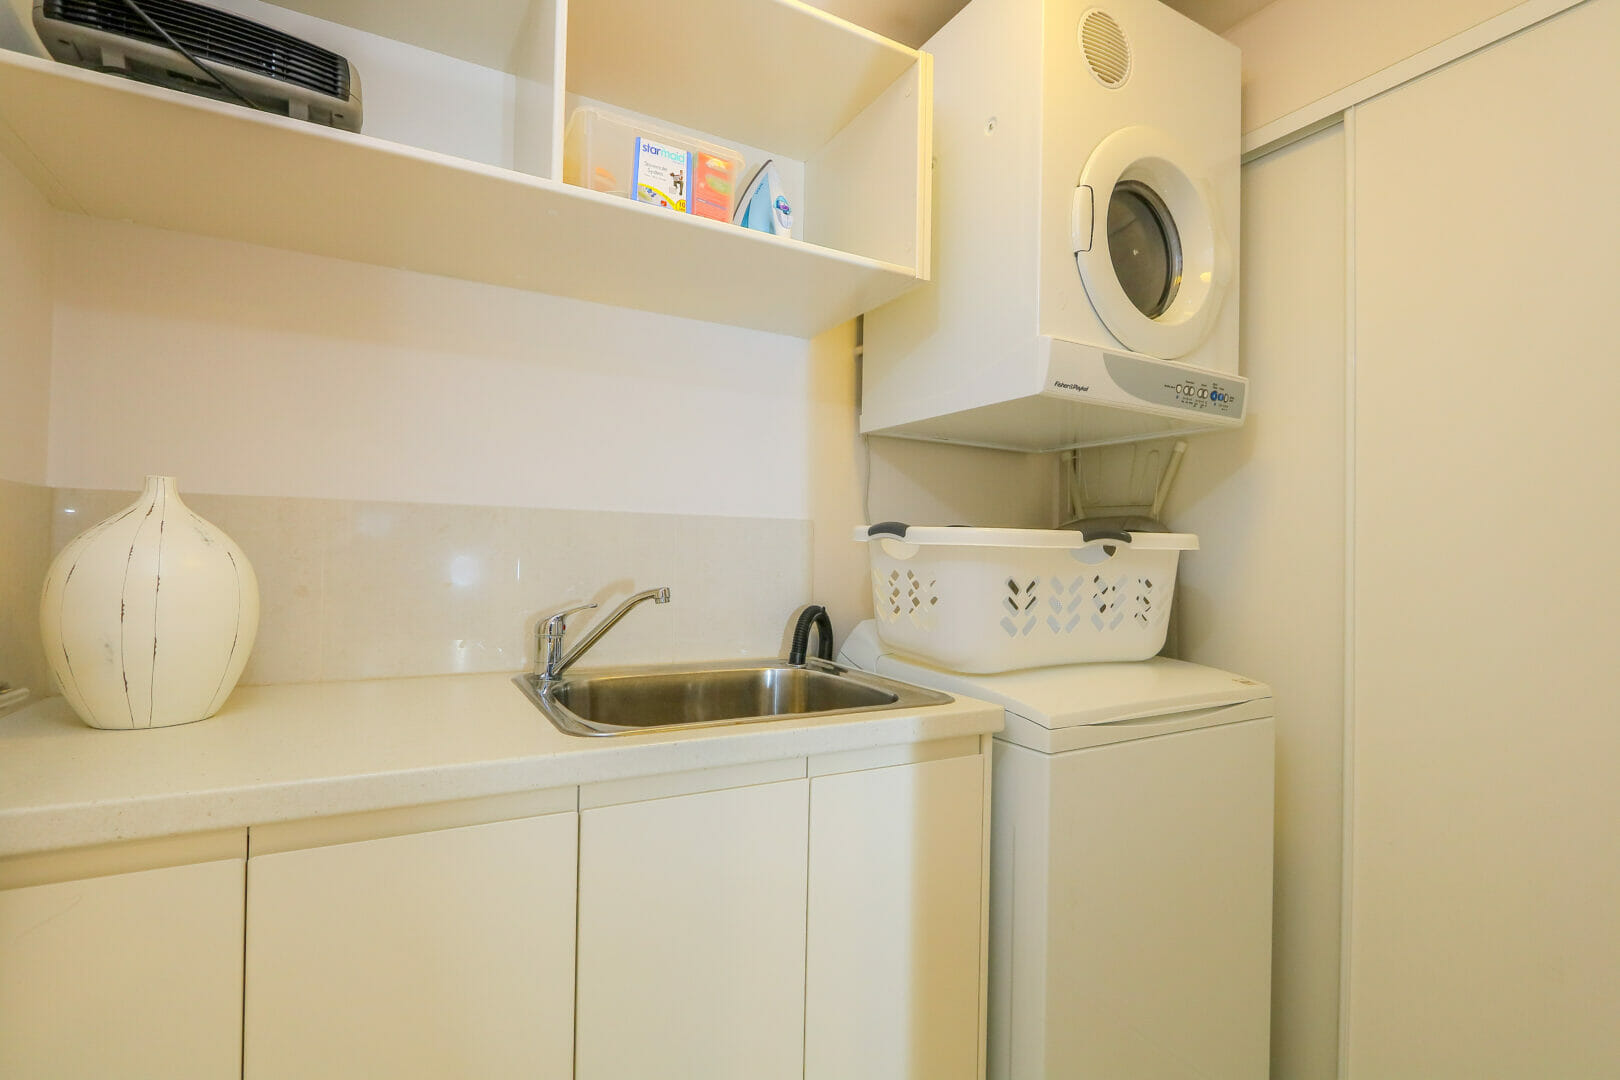 Laundry with washing machine, clothes dryer, bench and basin